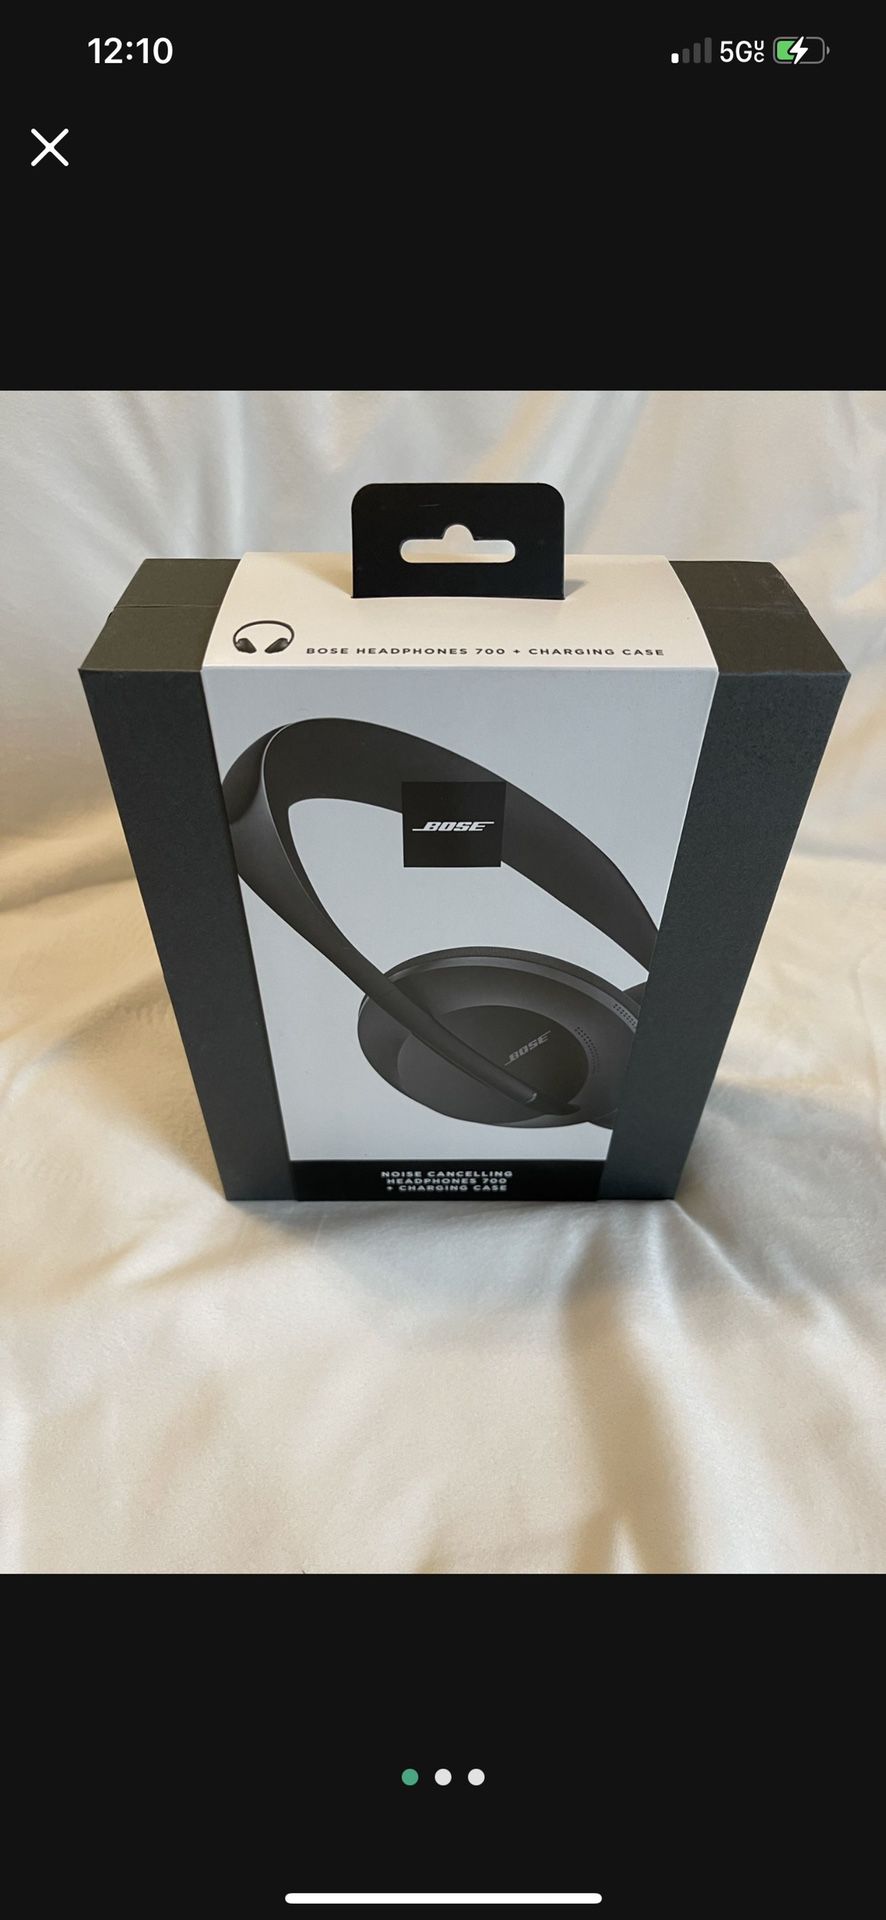 Bose Noise Cancelling Headphones 700 with Premium Charging Case